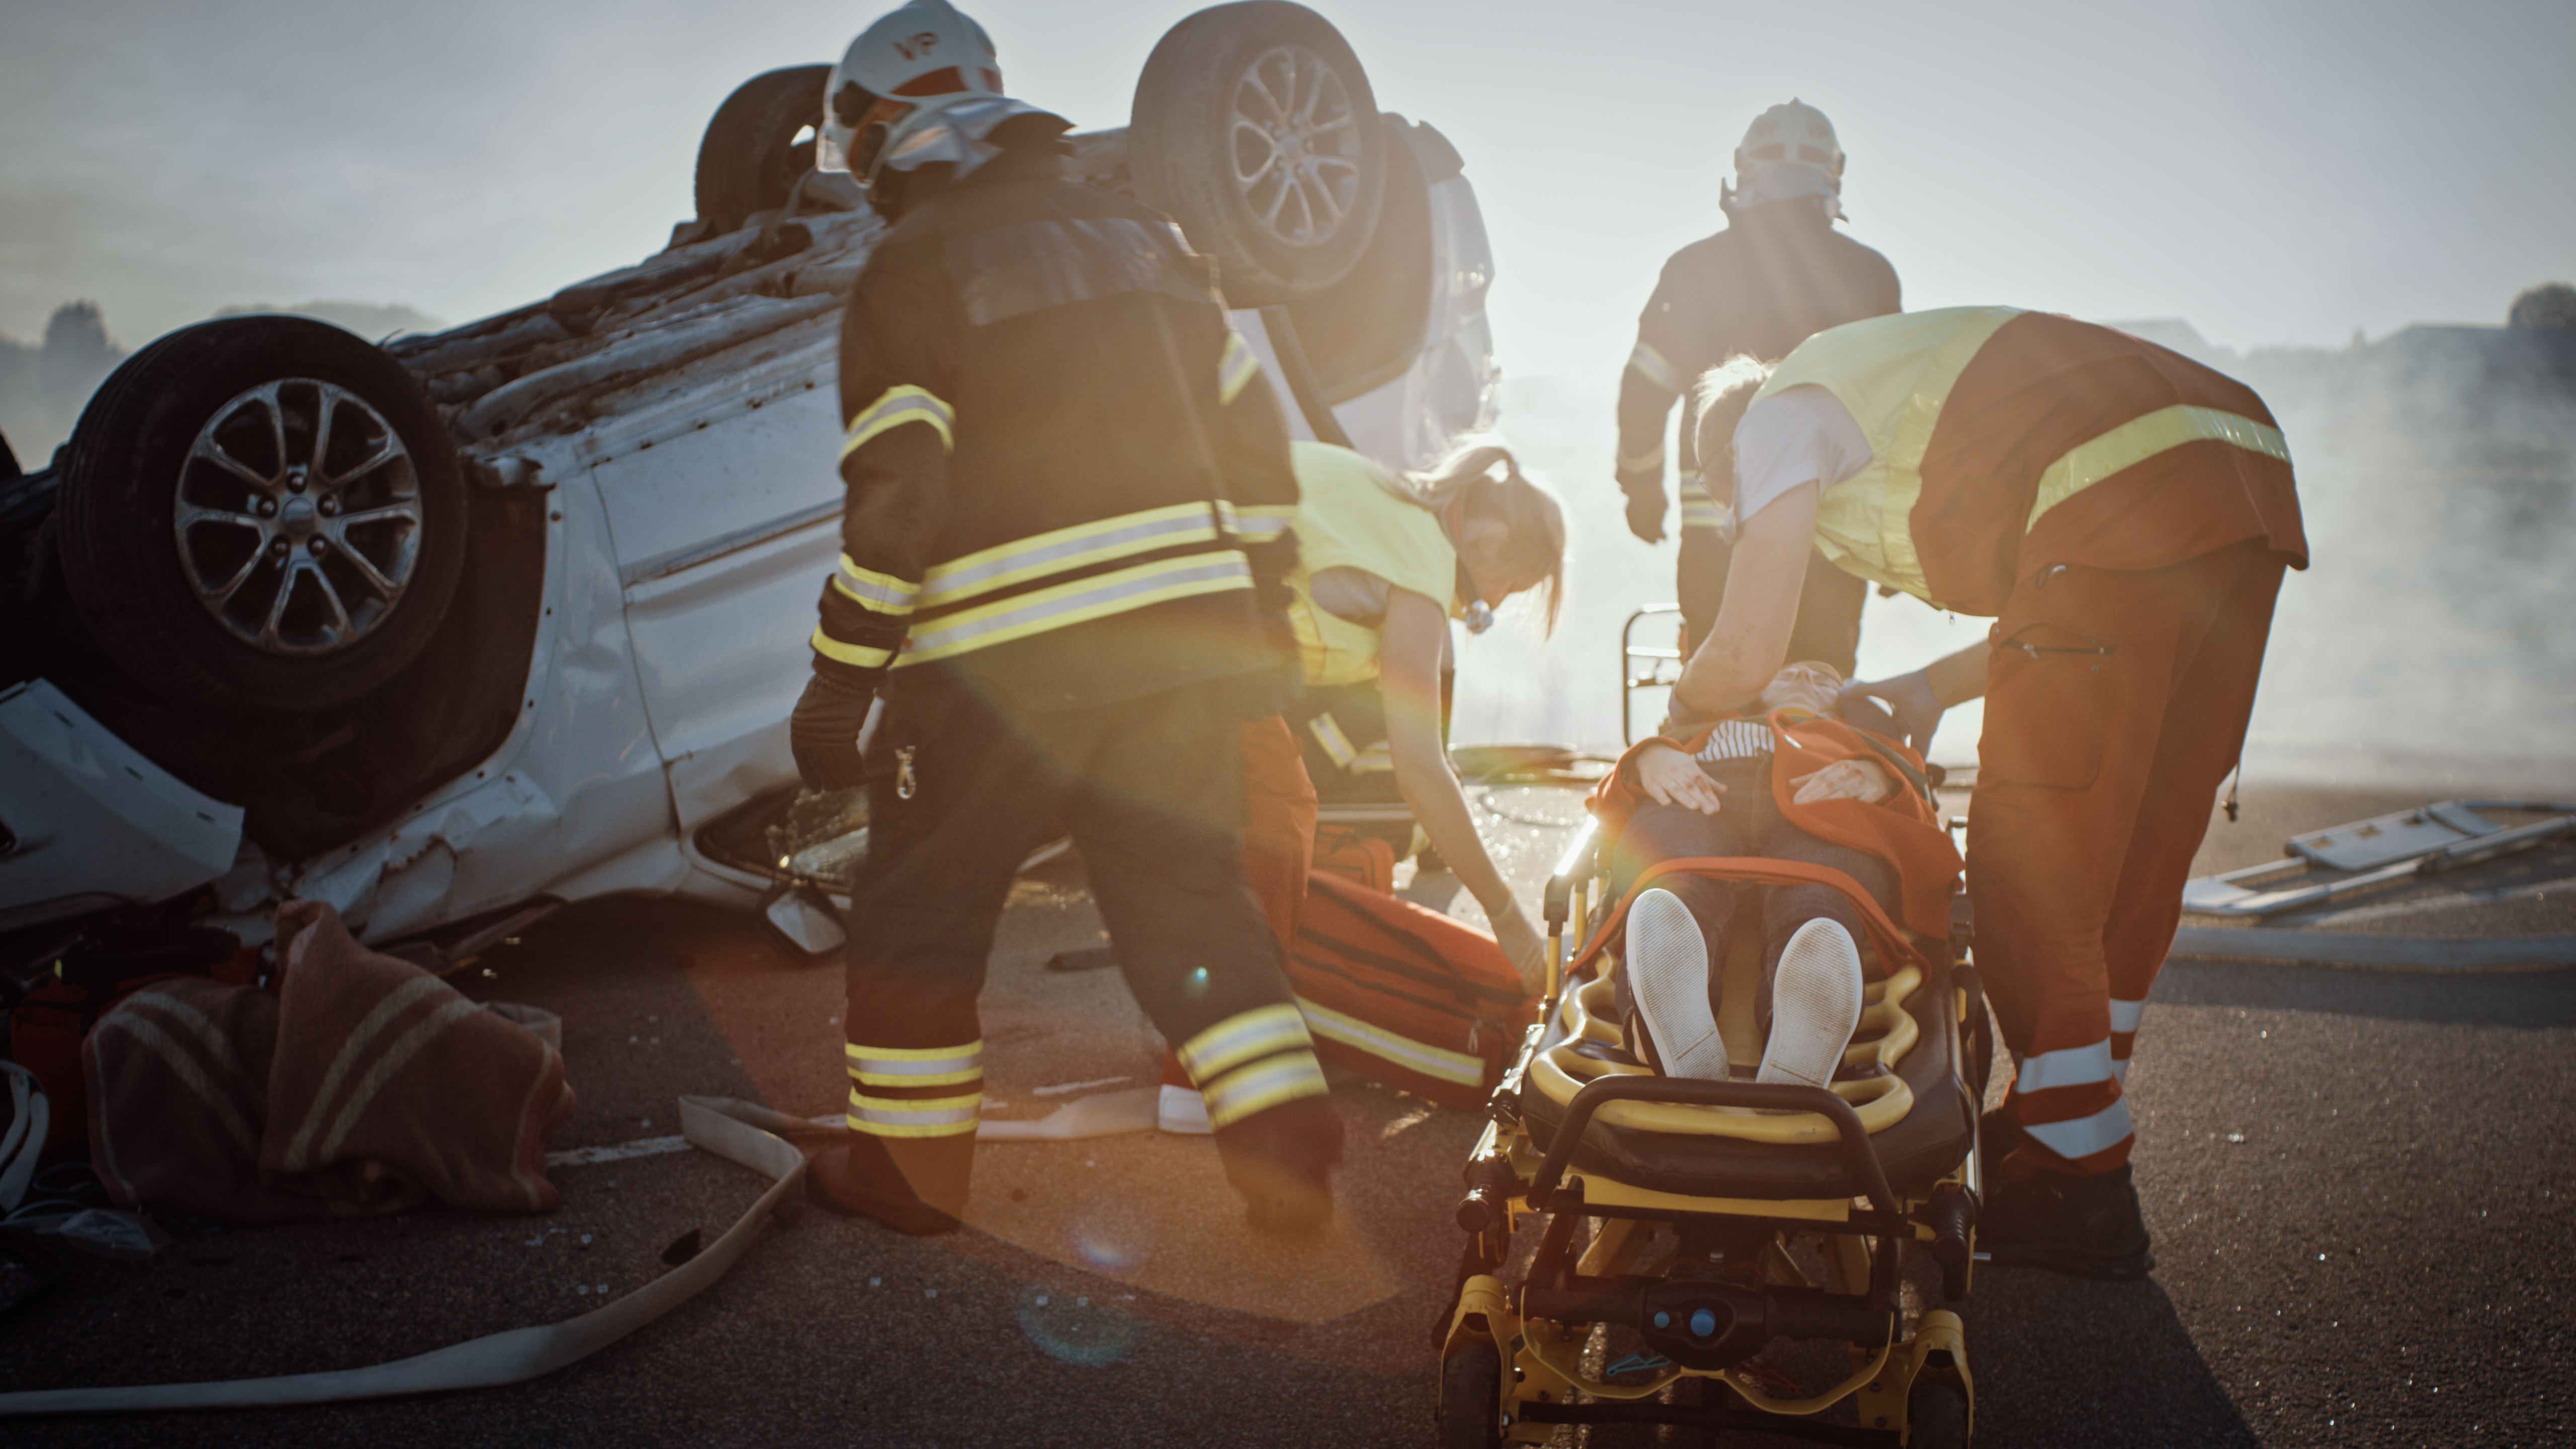 Emergency workers attend to someone at the scene of a car accident